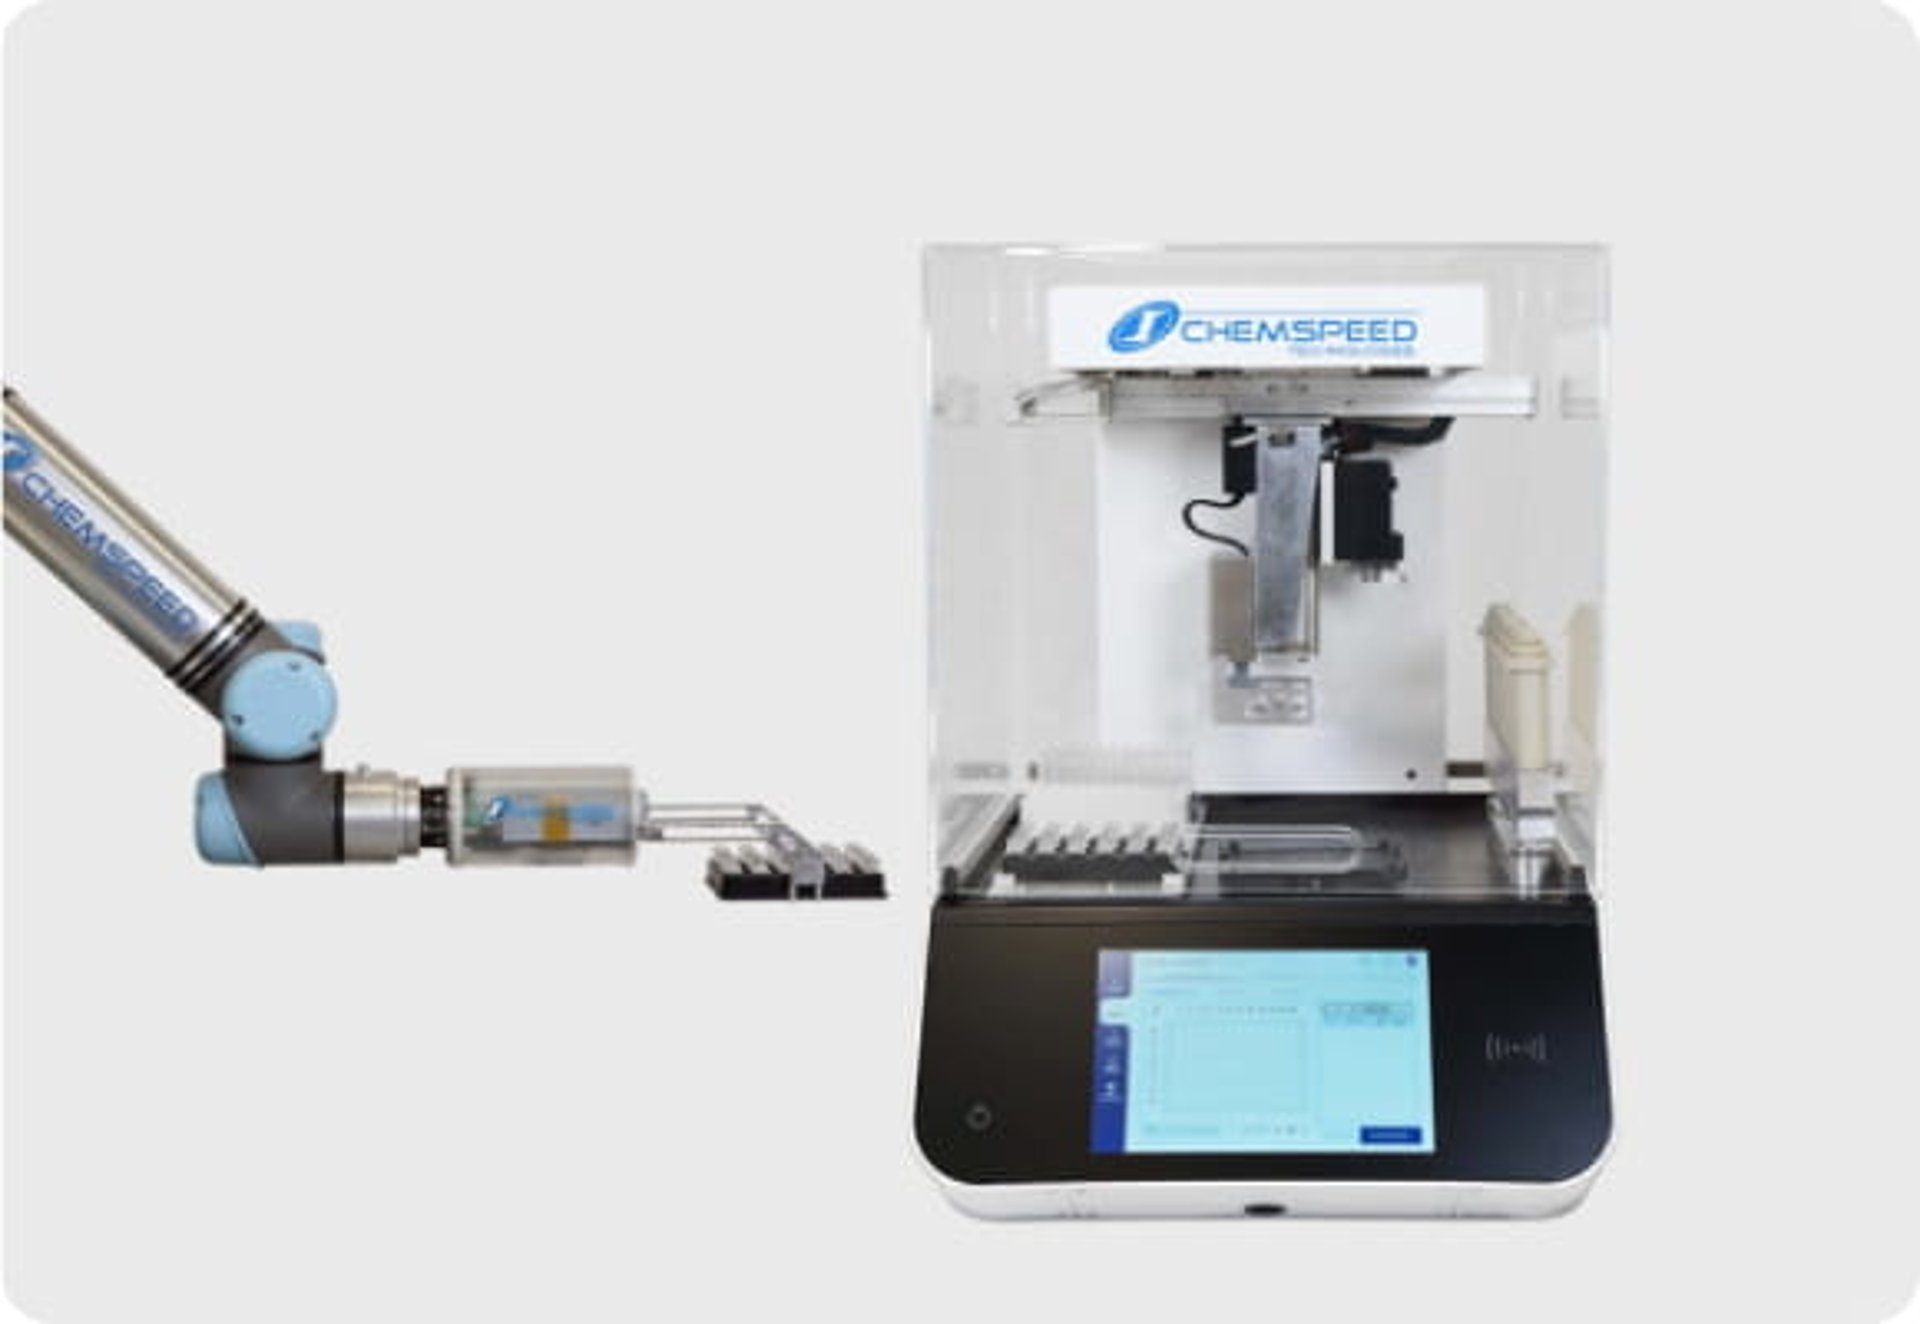 A robotic arm delivering a tray of glass vials to a Chemspeed vial weighing robot with a touch screen